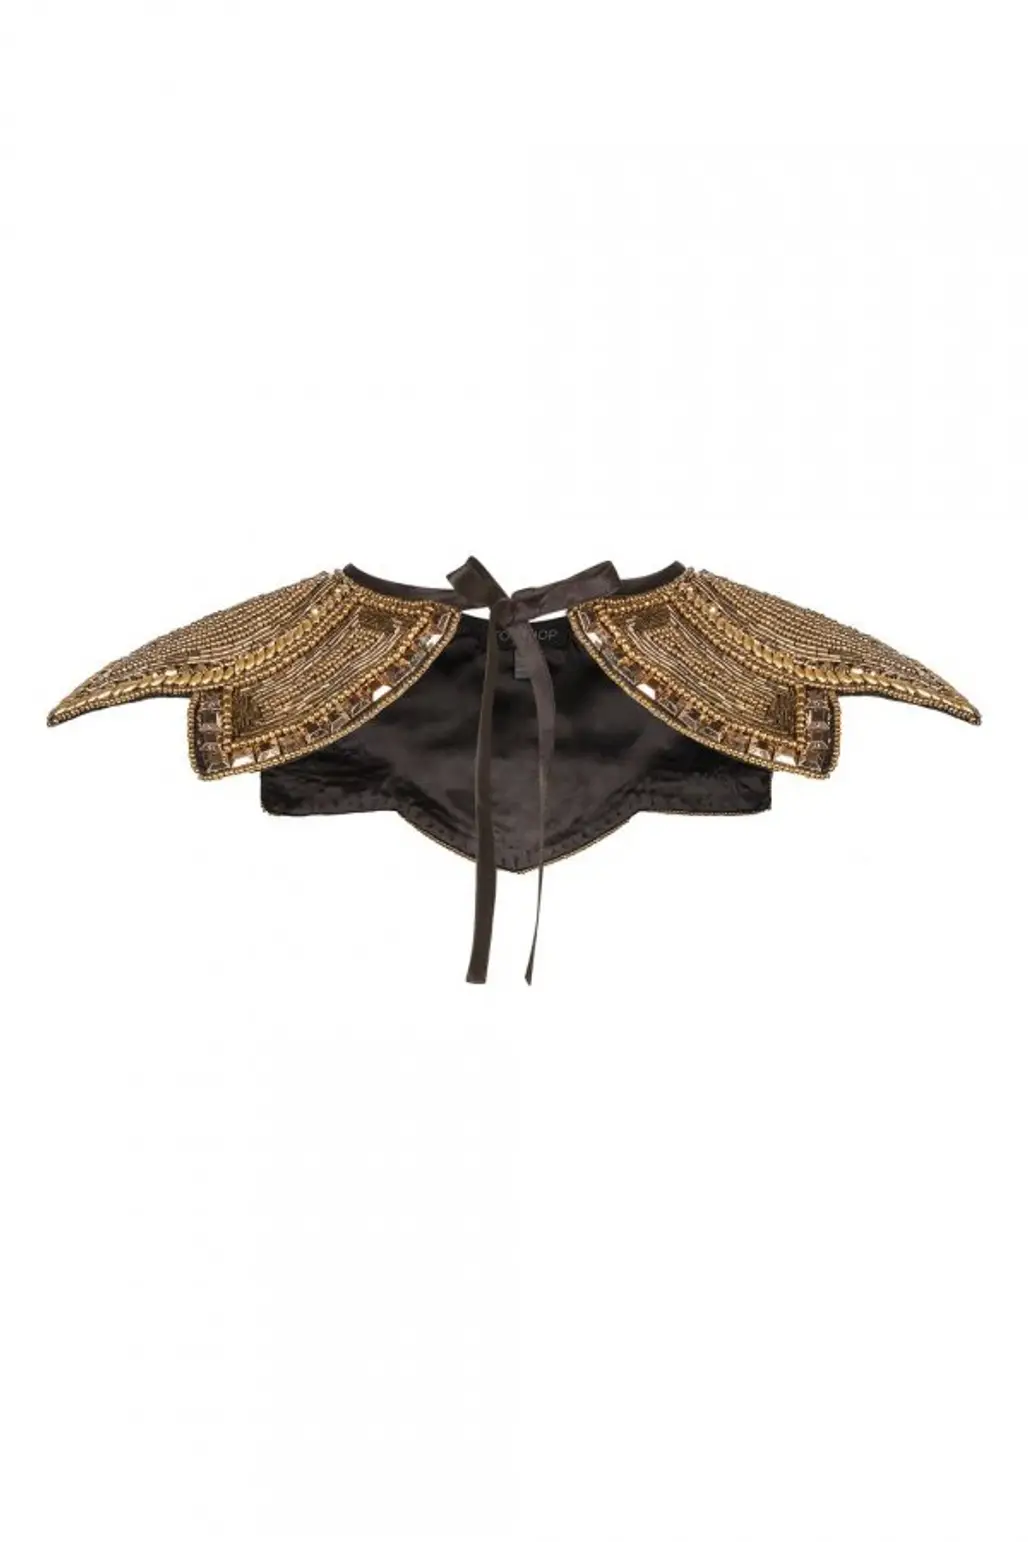 moths and butterflies, product design, wing,